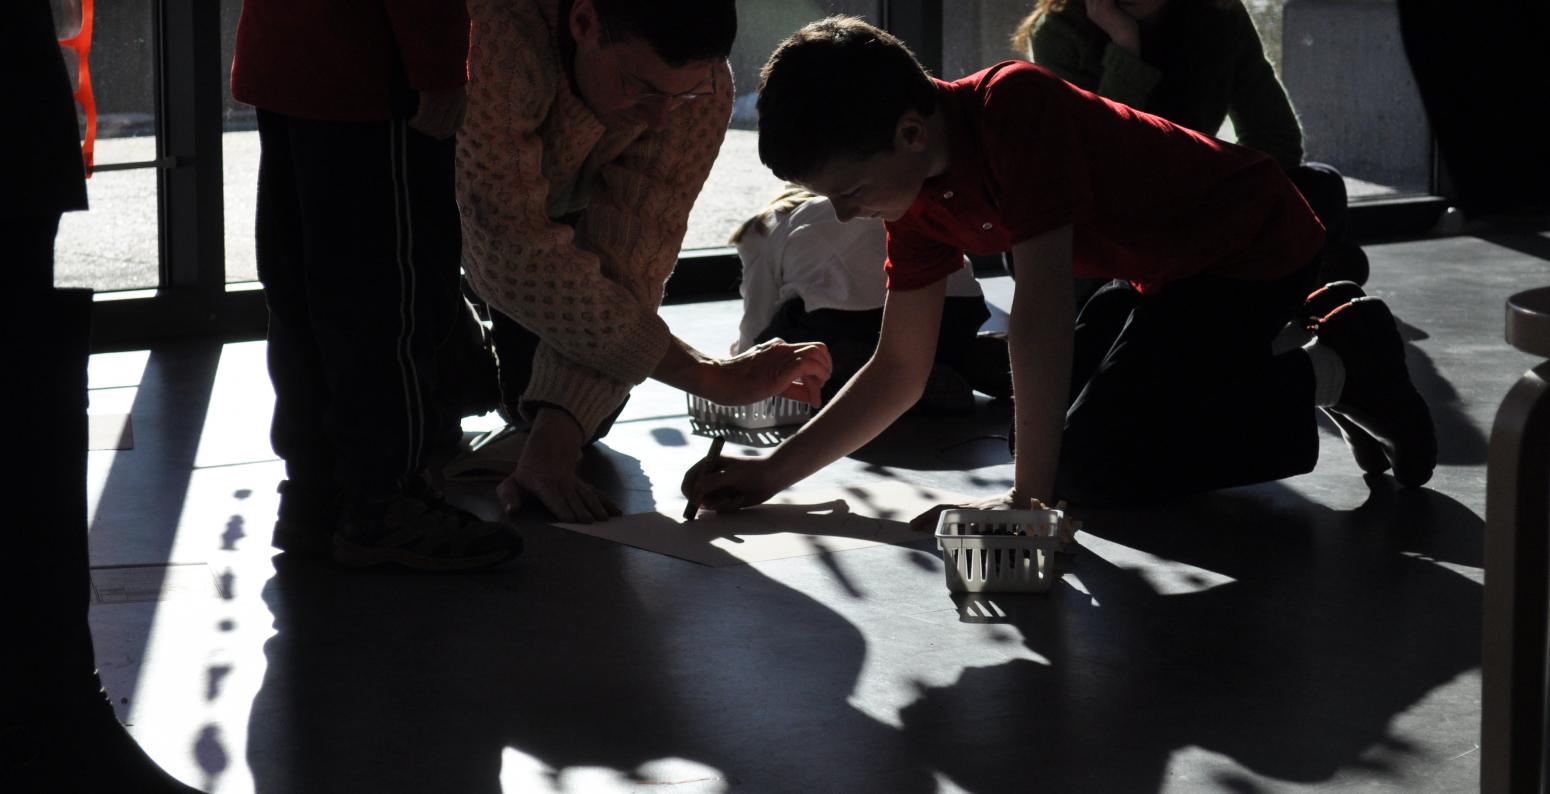 A group of people using shadows to draw on paper attached to the ground.